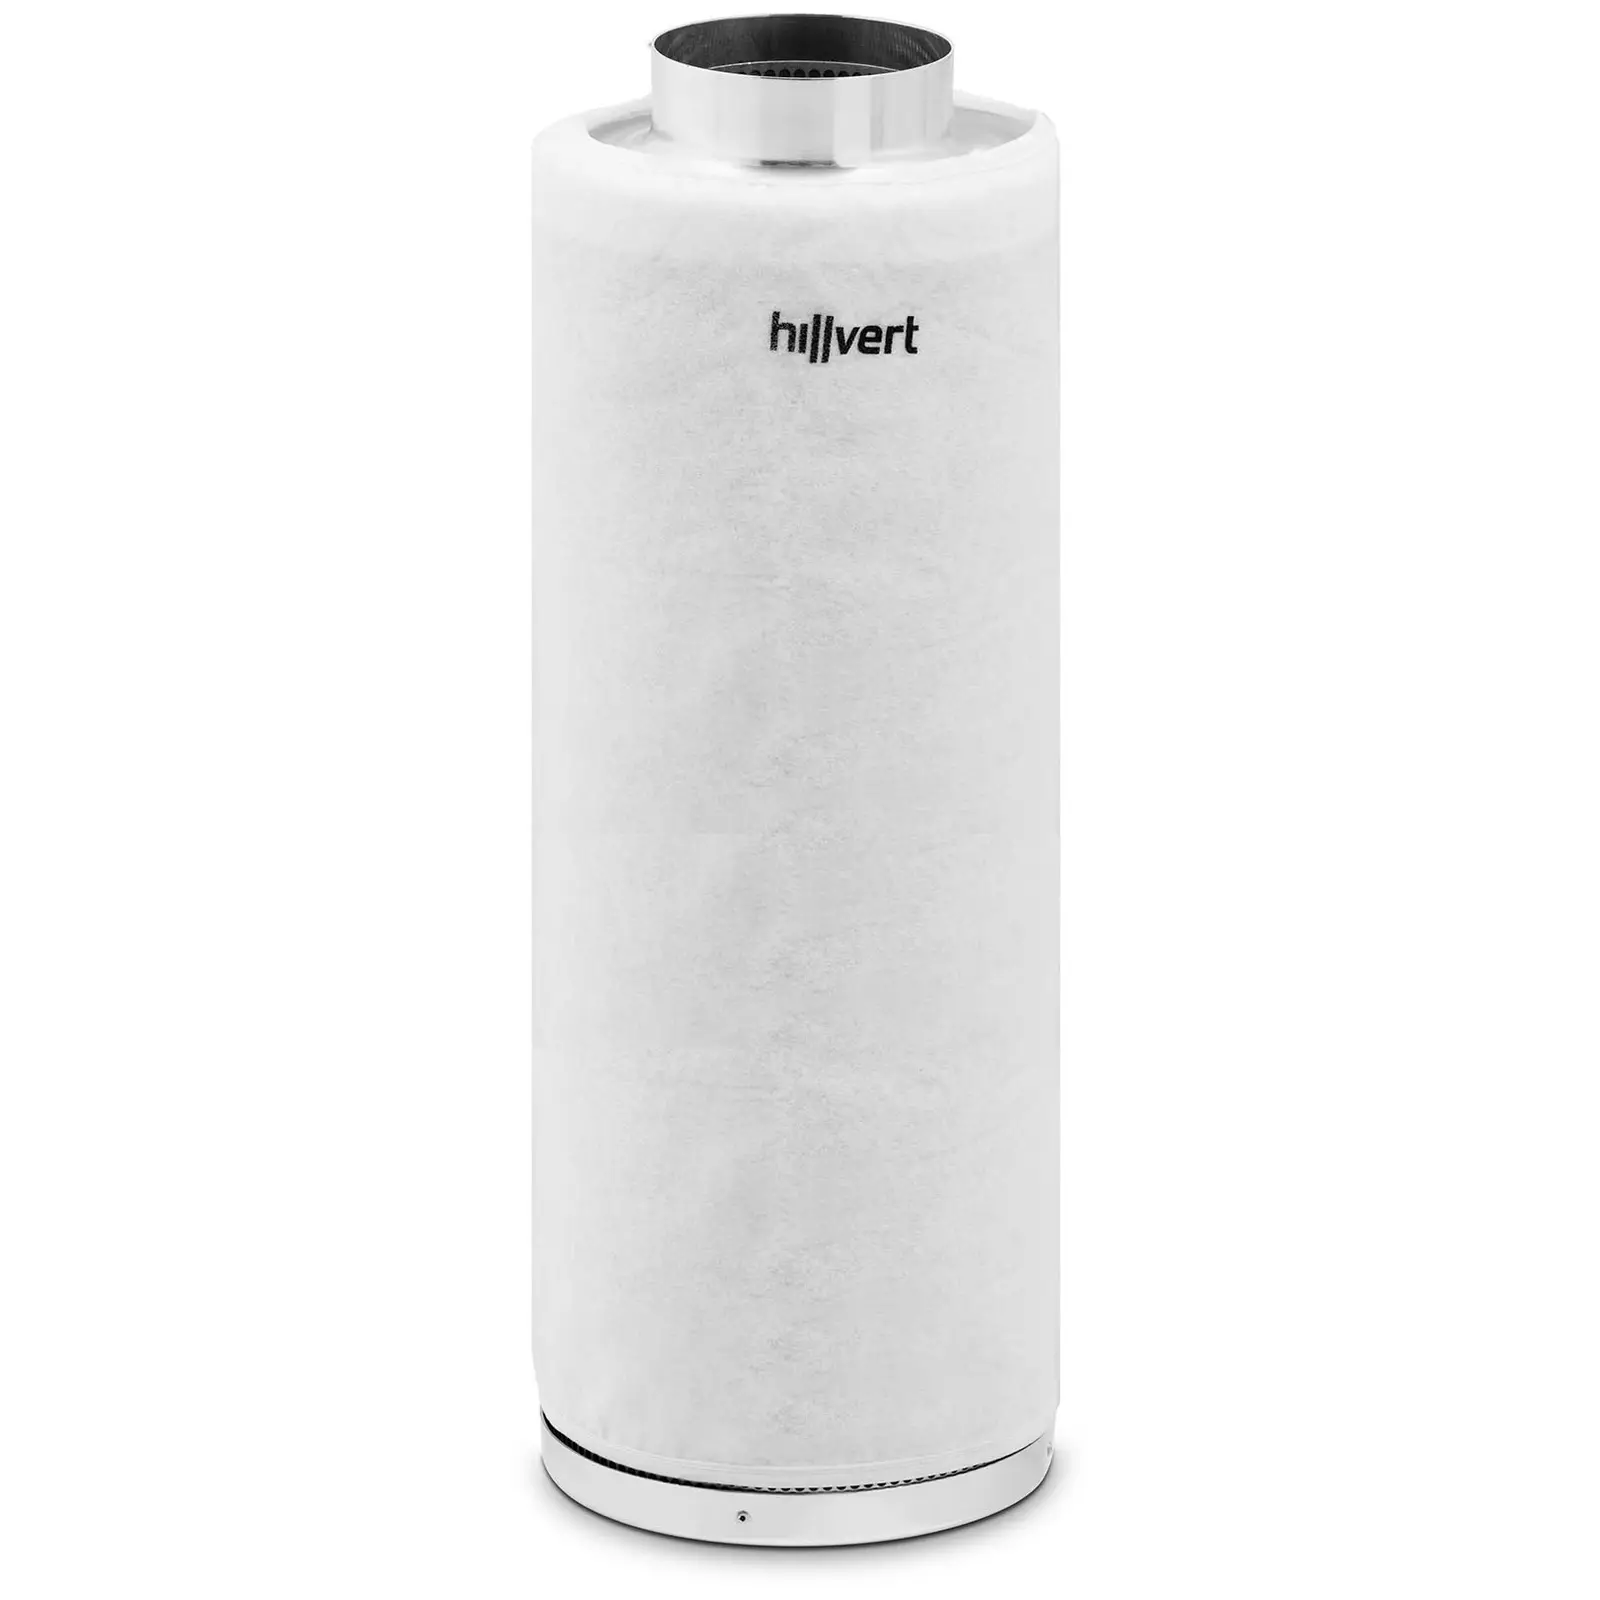 Activated Carbon Filter - steel - 102 mm - 50 cm - up to 85 °C